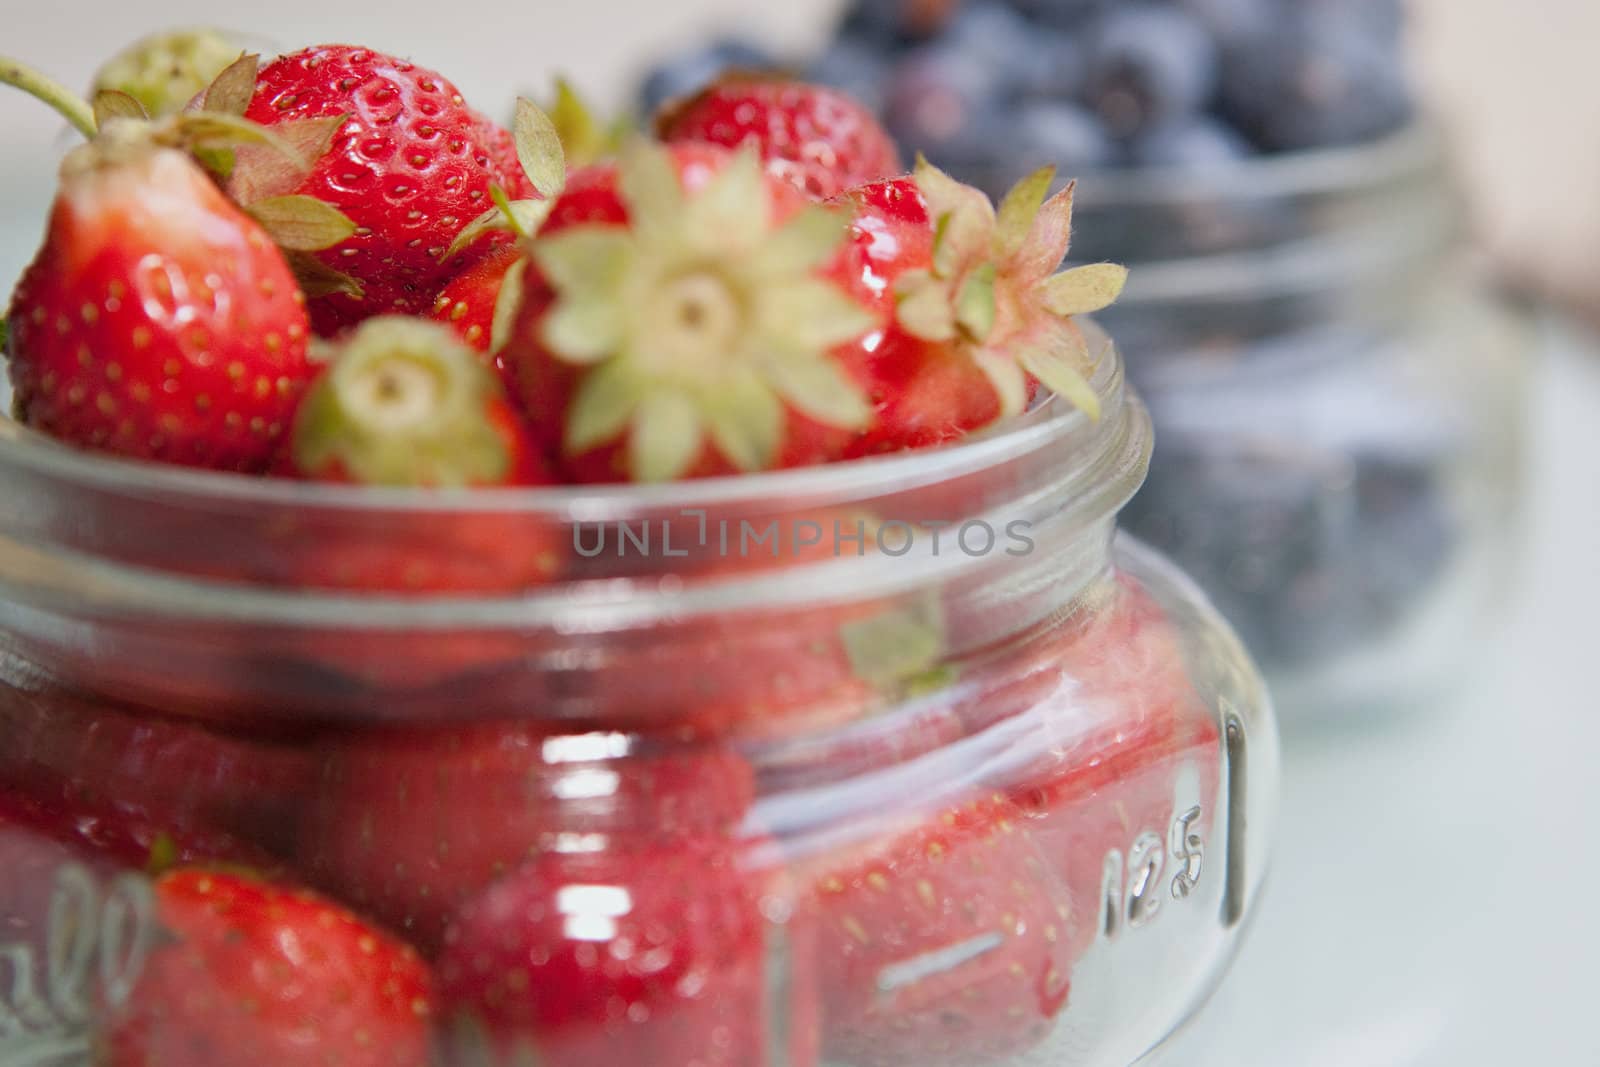 Bunch of fresh, red Strawberries with blueberry jar in the background